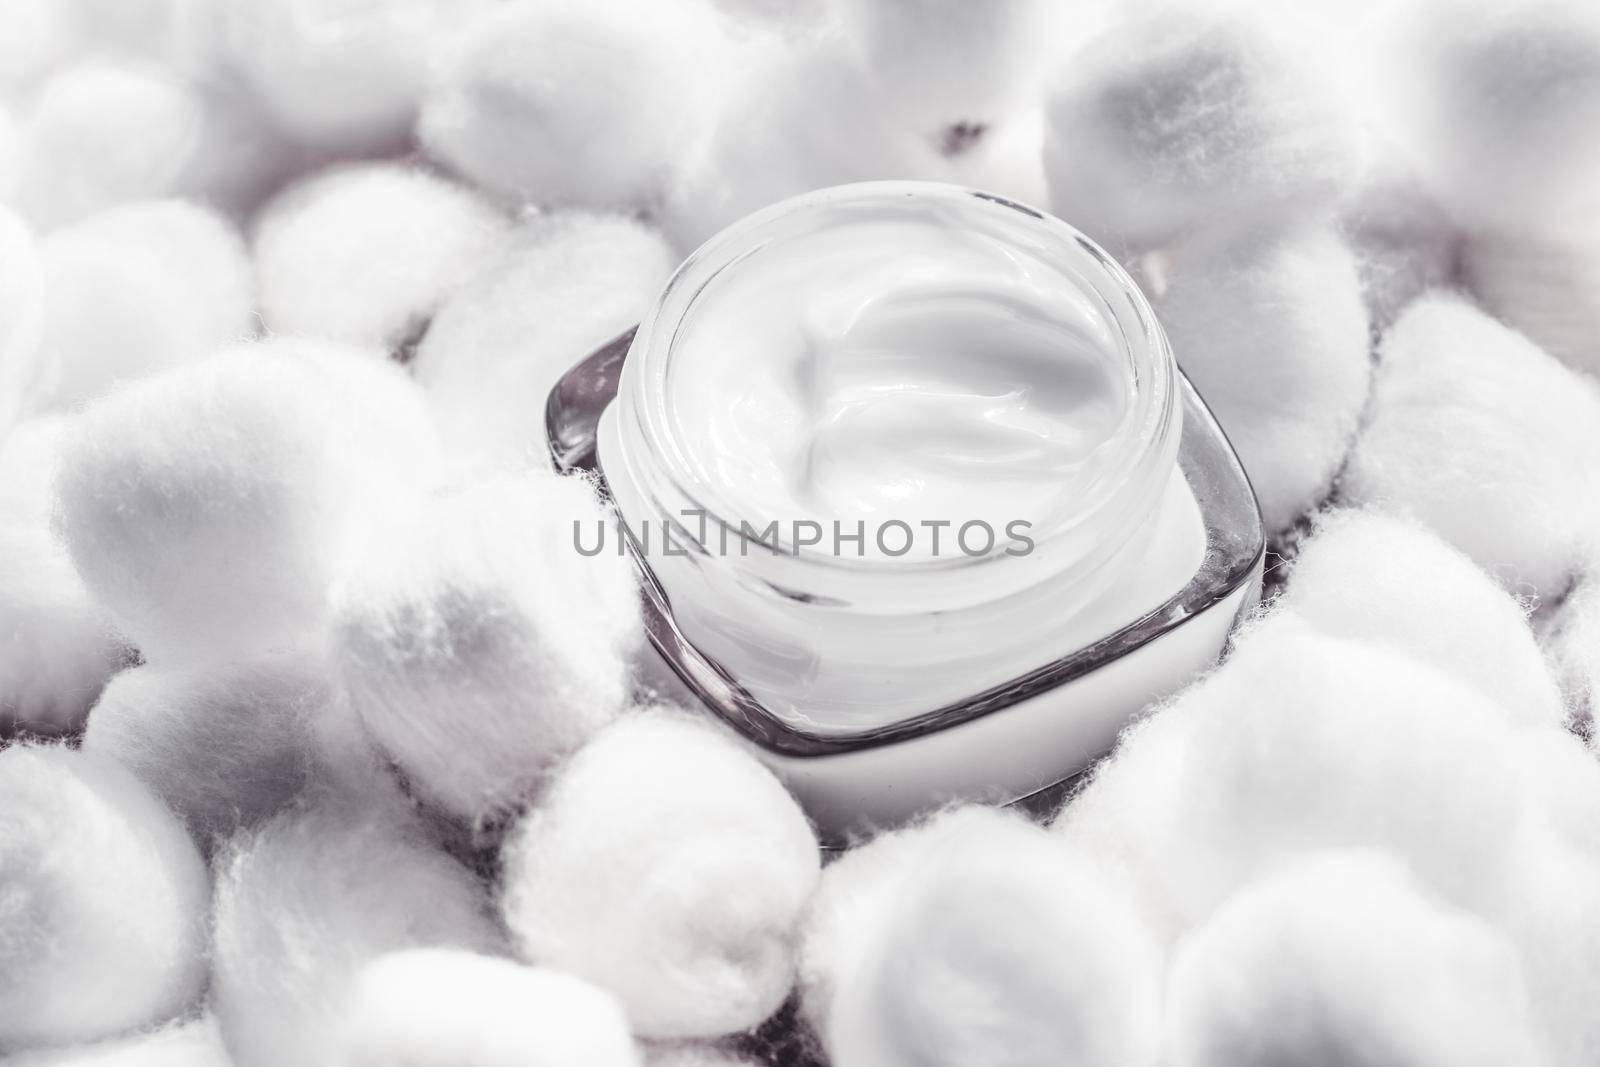 Cosmetic branding, moisturizing emulsion and facial care concept - Luxury face cream for sensitive skin and white cotton balls on background, spa cosmetics and natural skincare beauty brand product